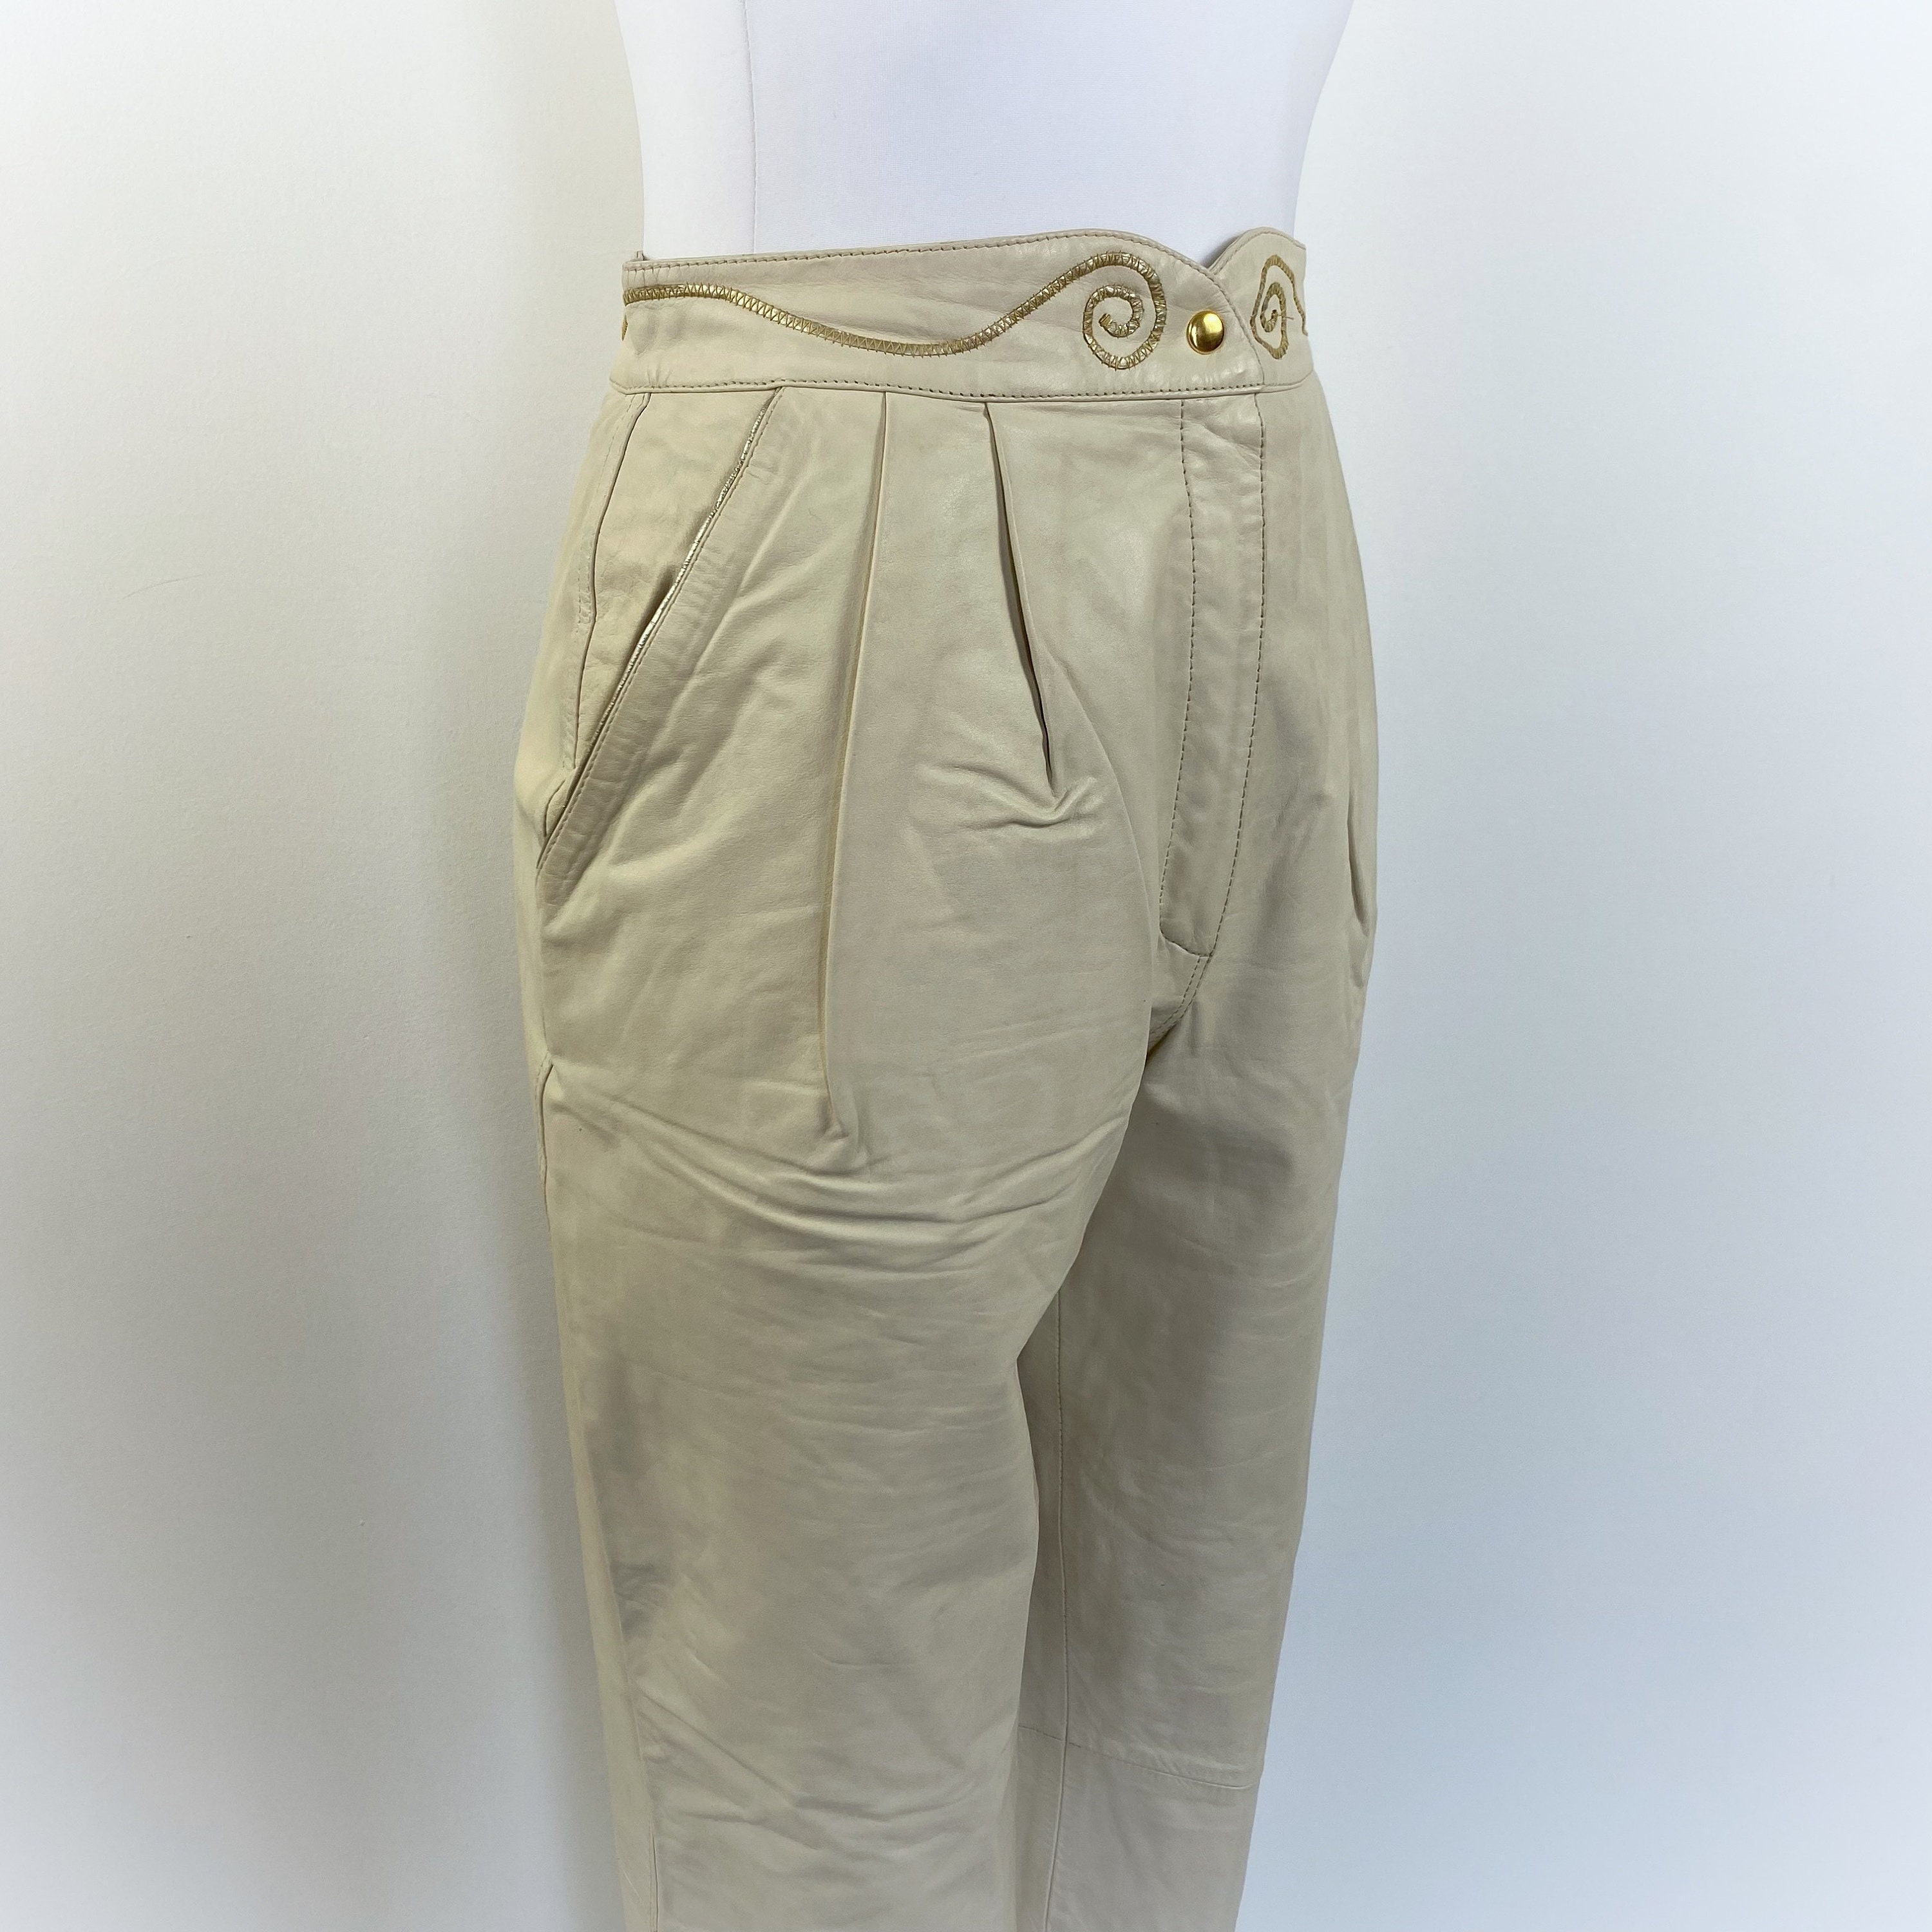 Vintage 1980s 1990s White Leather Trousers 80s 90s White Leather